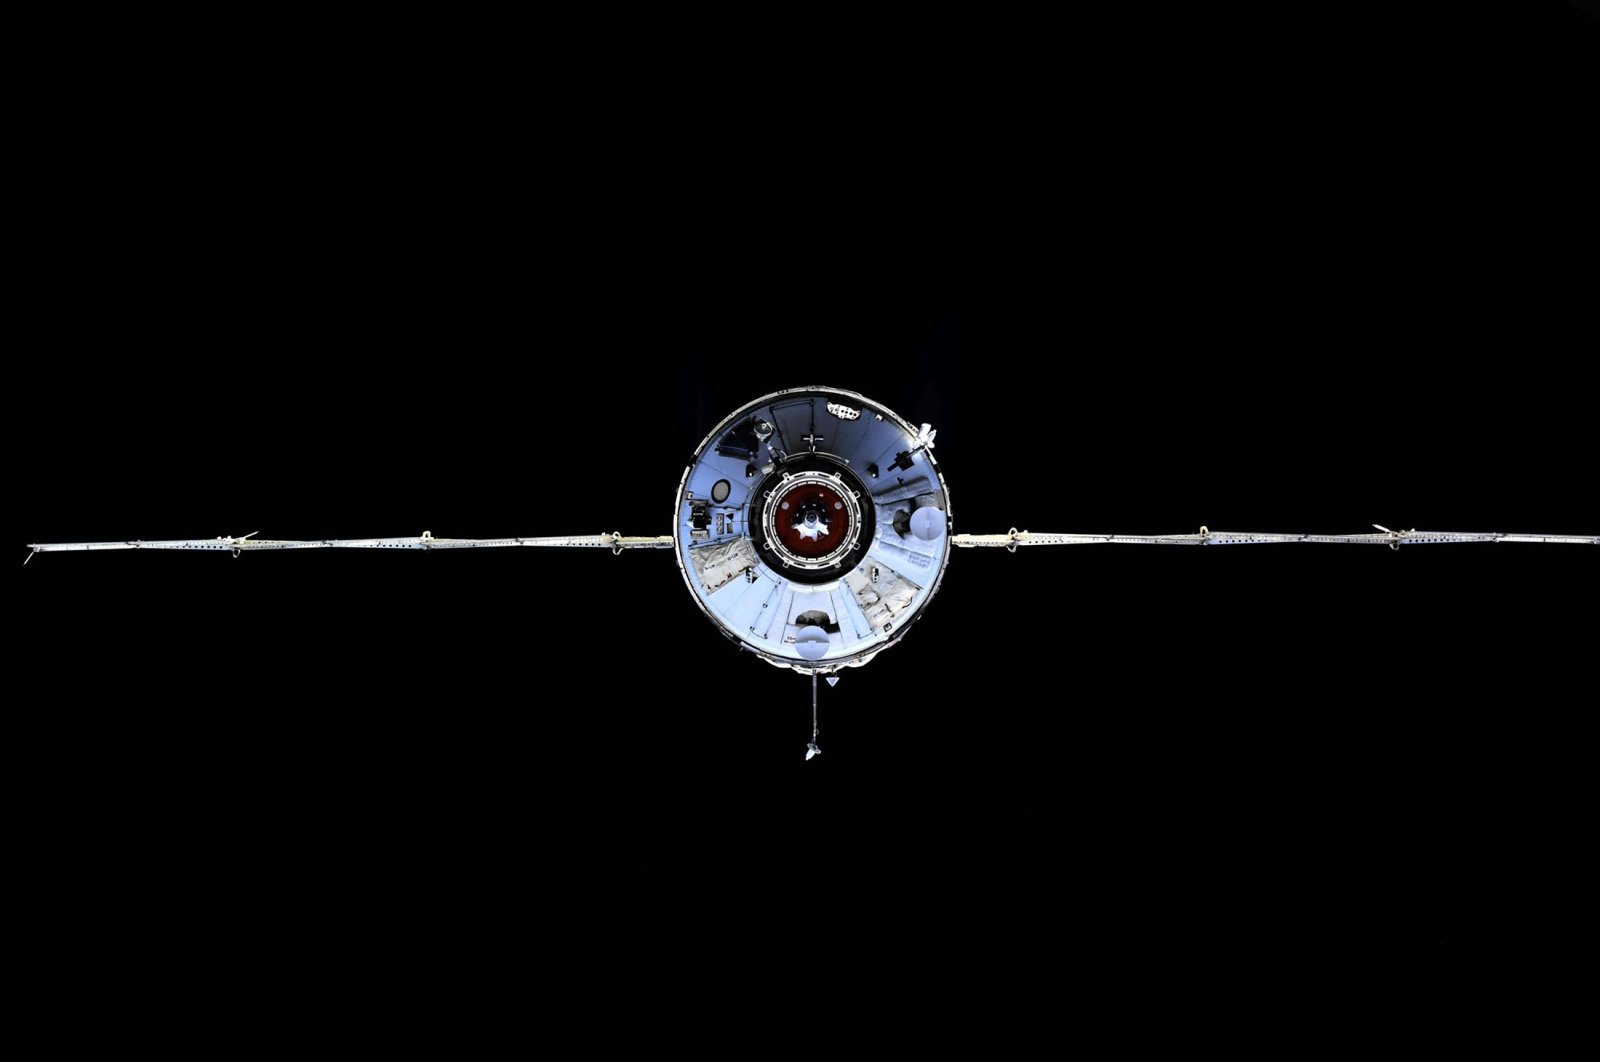 The Nauka module is seen prior to docking with the International Space Station, July 29, 2021. (Roscosmos Space Agency via AP)